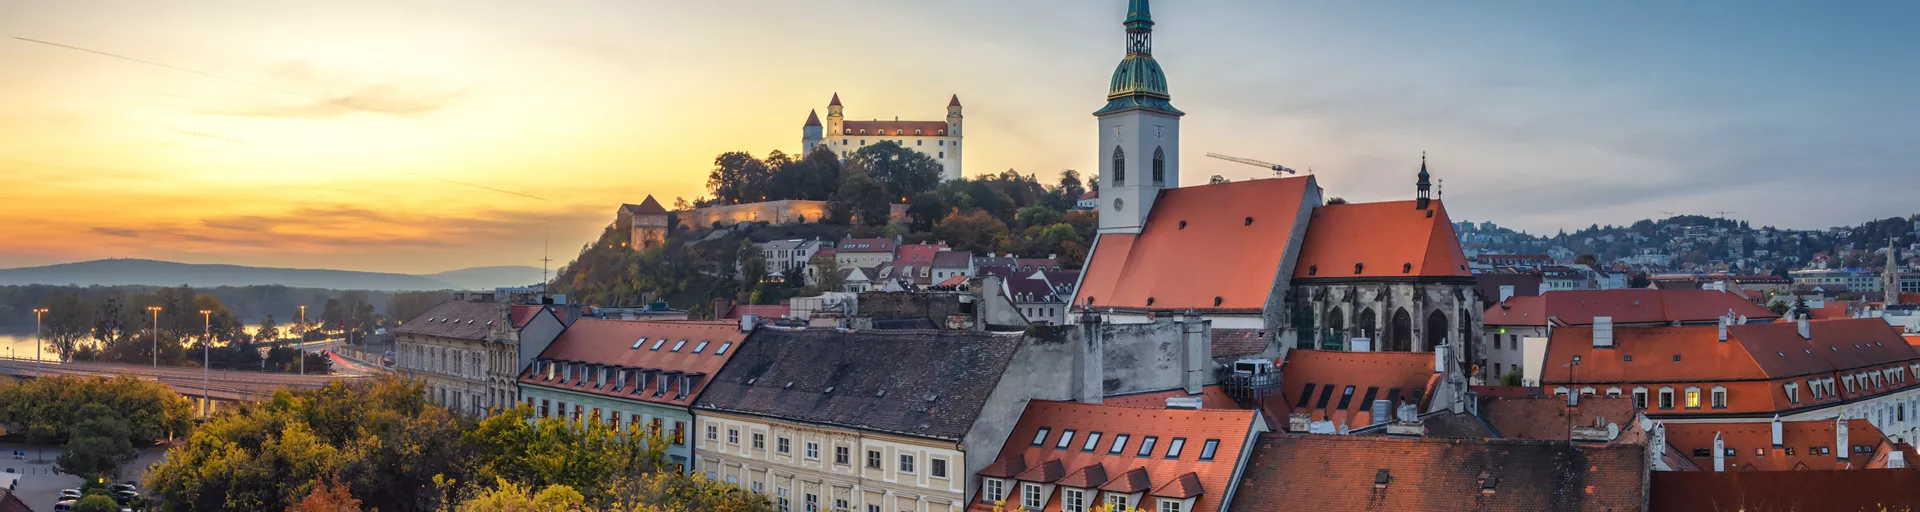 Slovakia Luxury Tours and Travel Guide